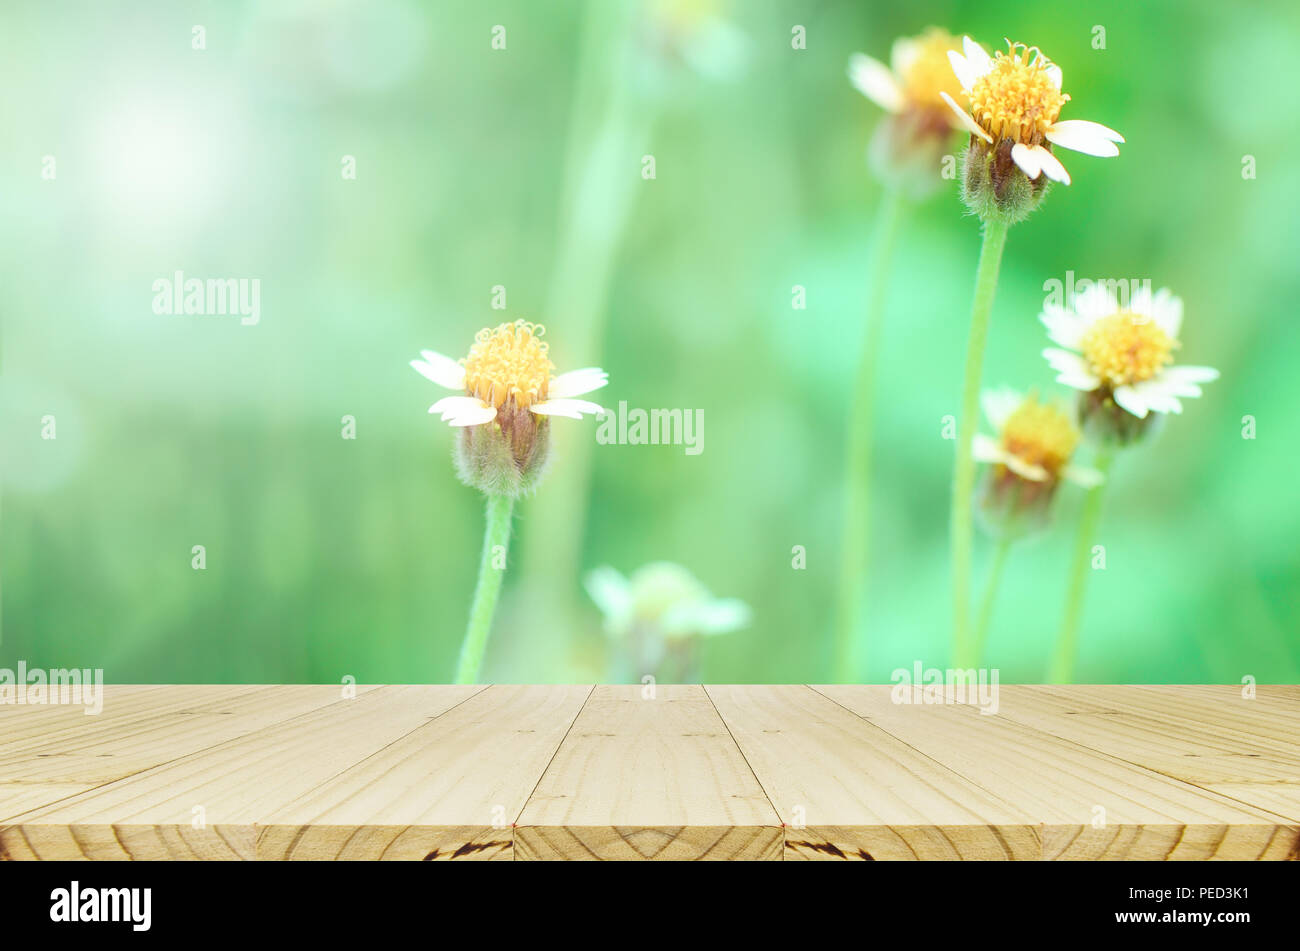 Pine wood counter with Maxican daisy flowers field on natural green background. Stock Photo